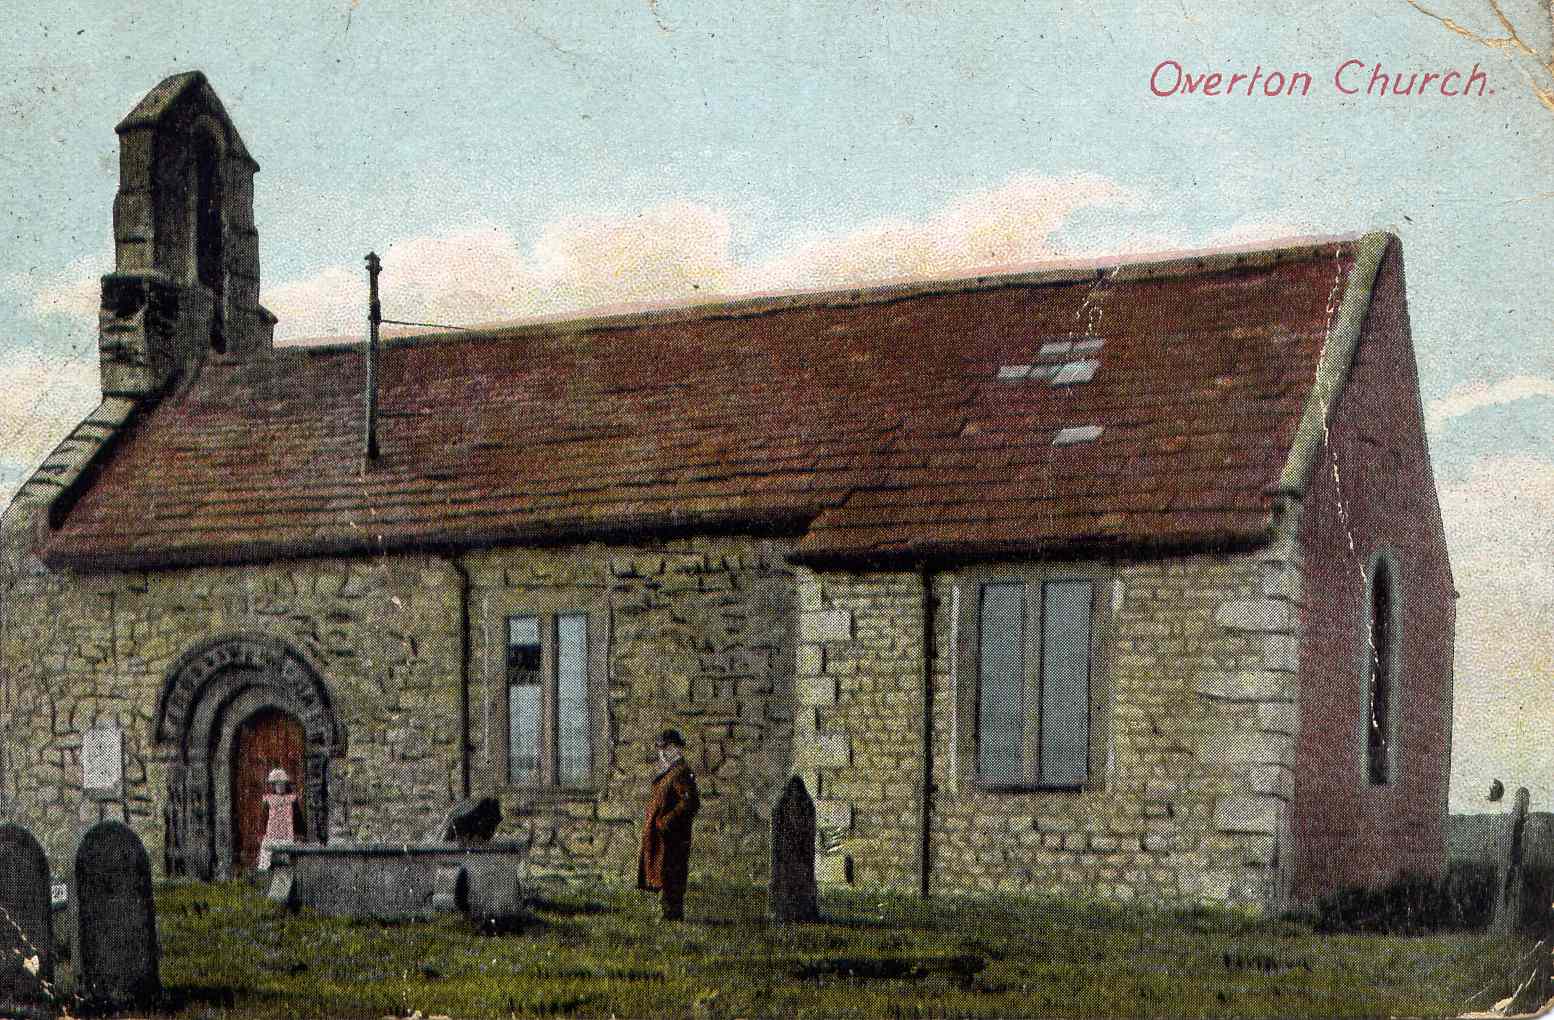 Overton Church, from an old post card